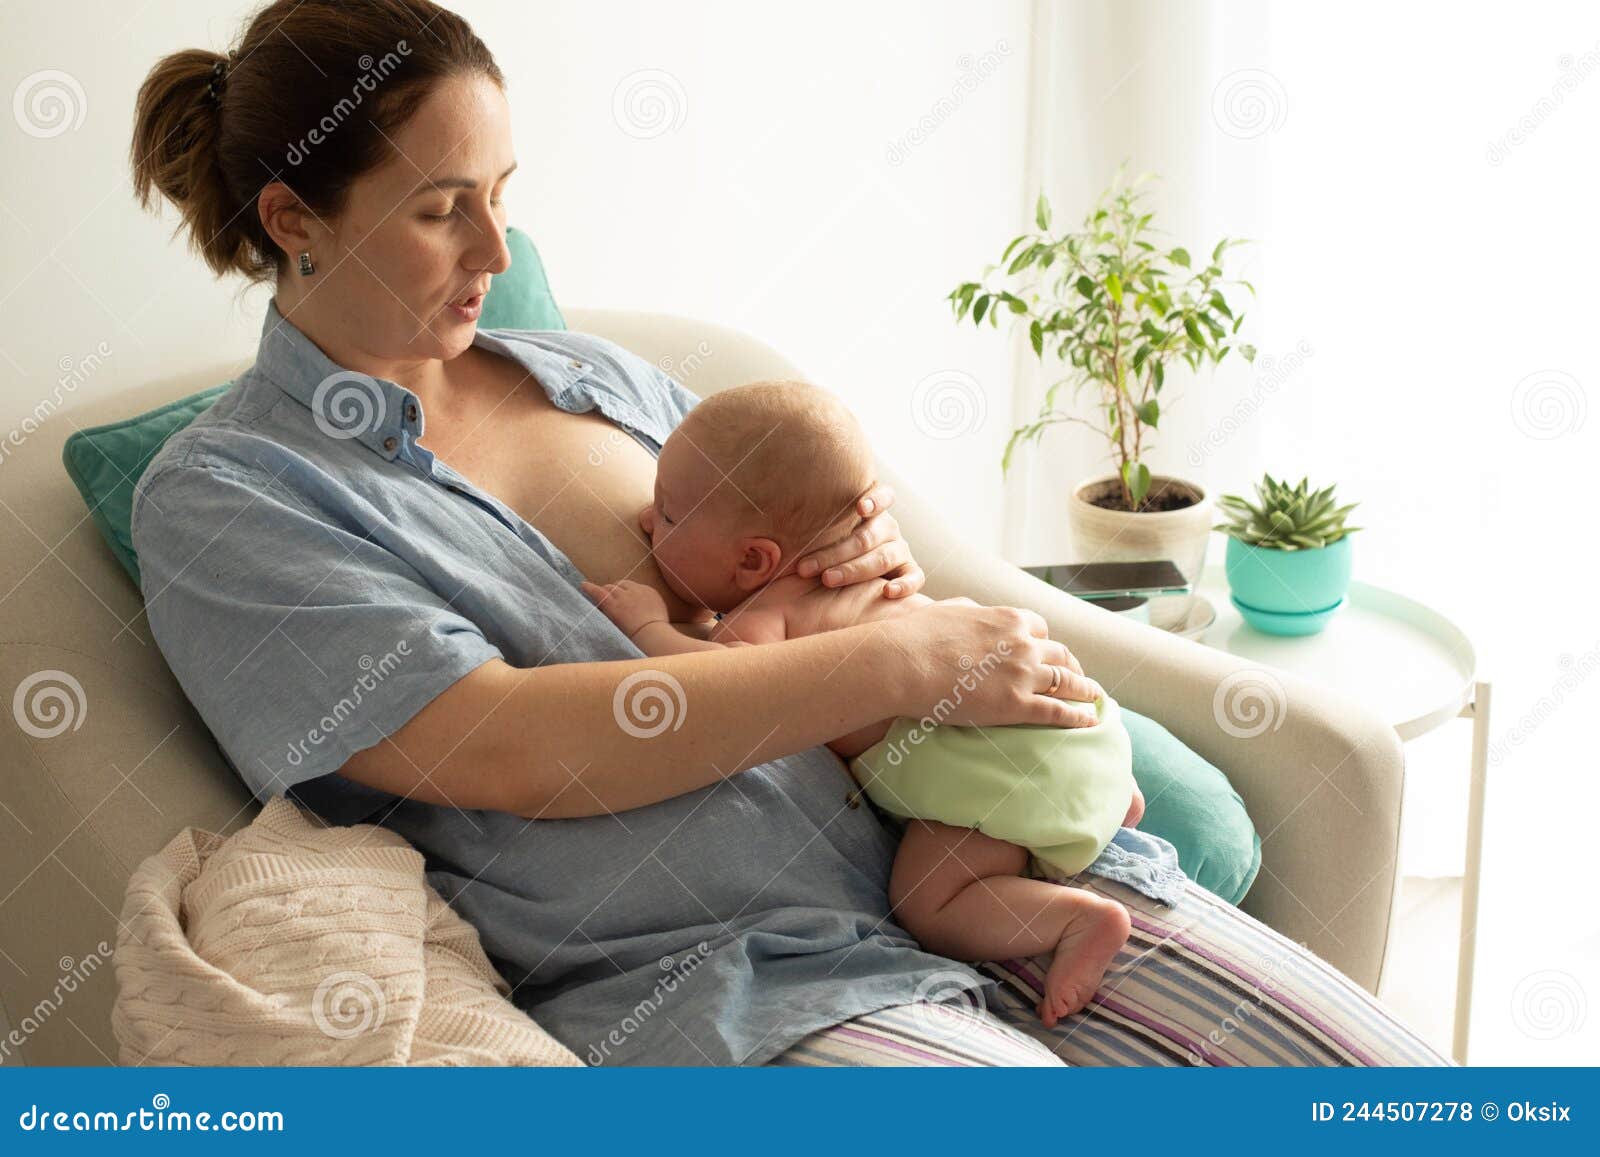 mothed and baby, breastfeeding in laid back position